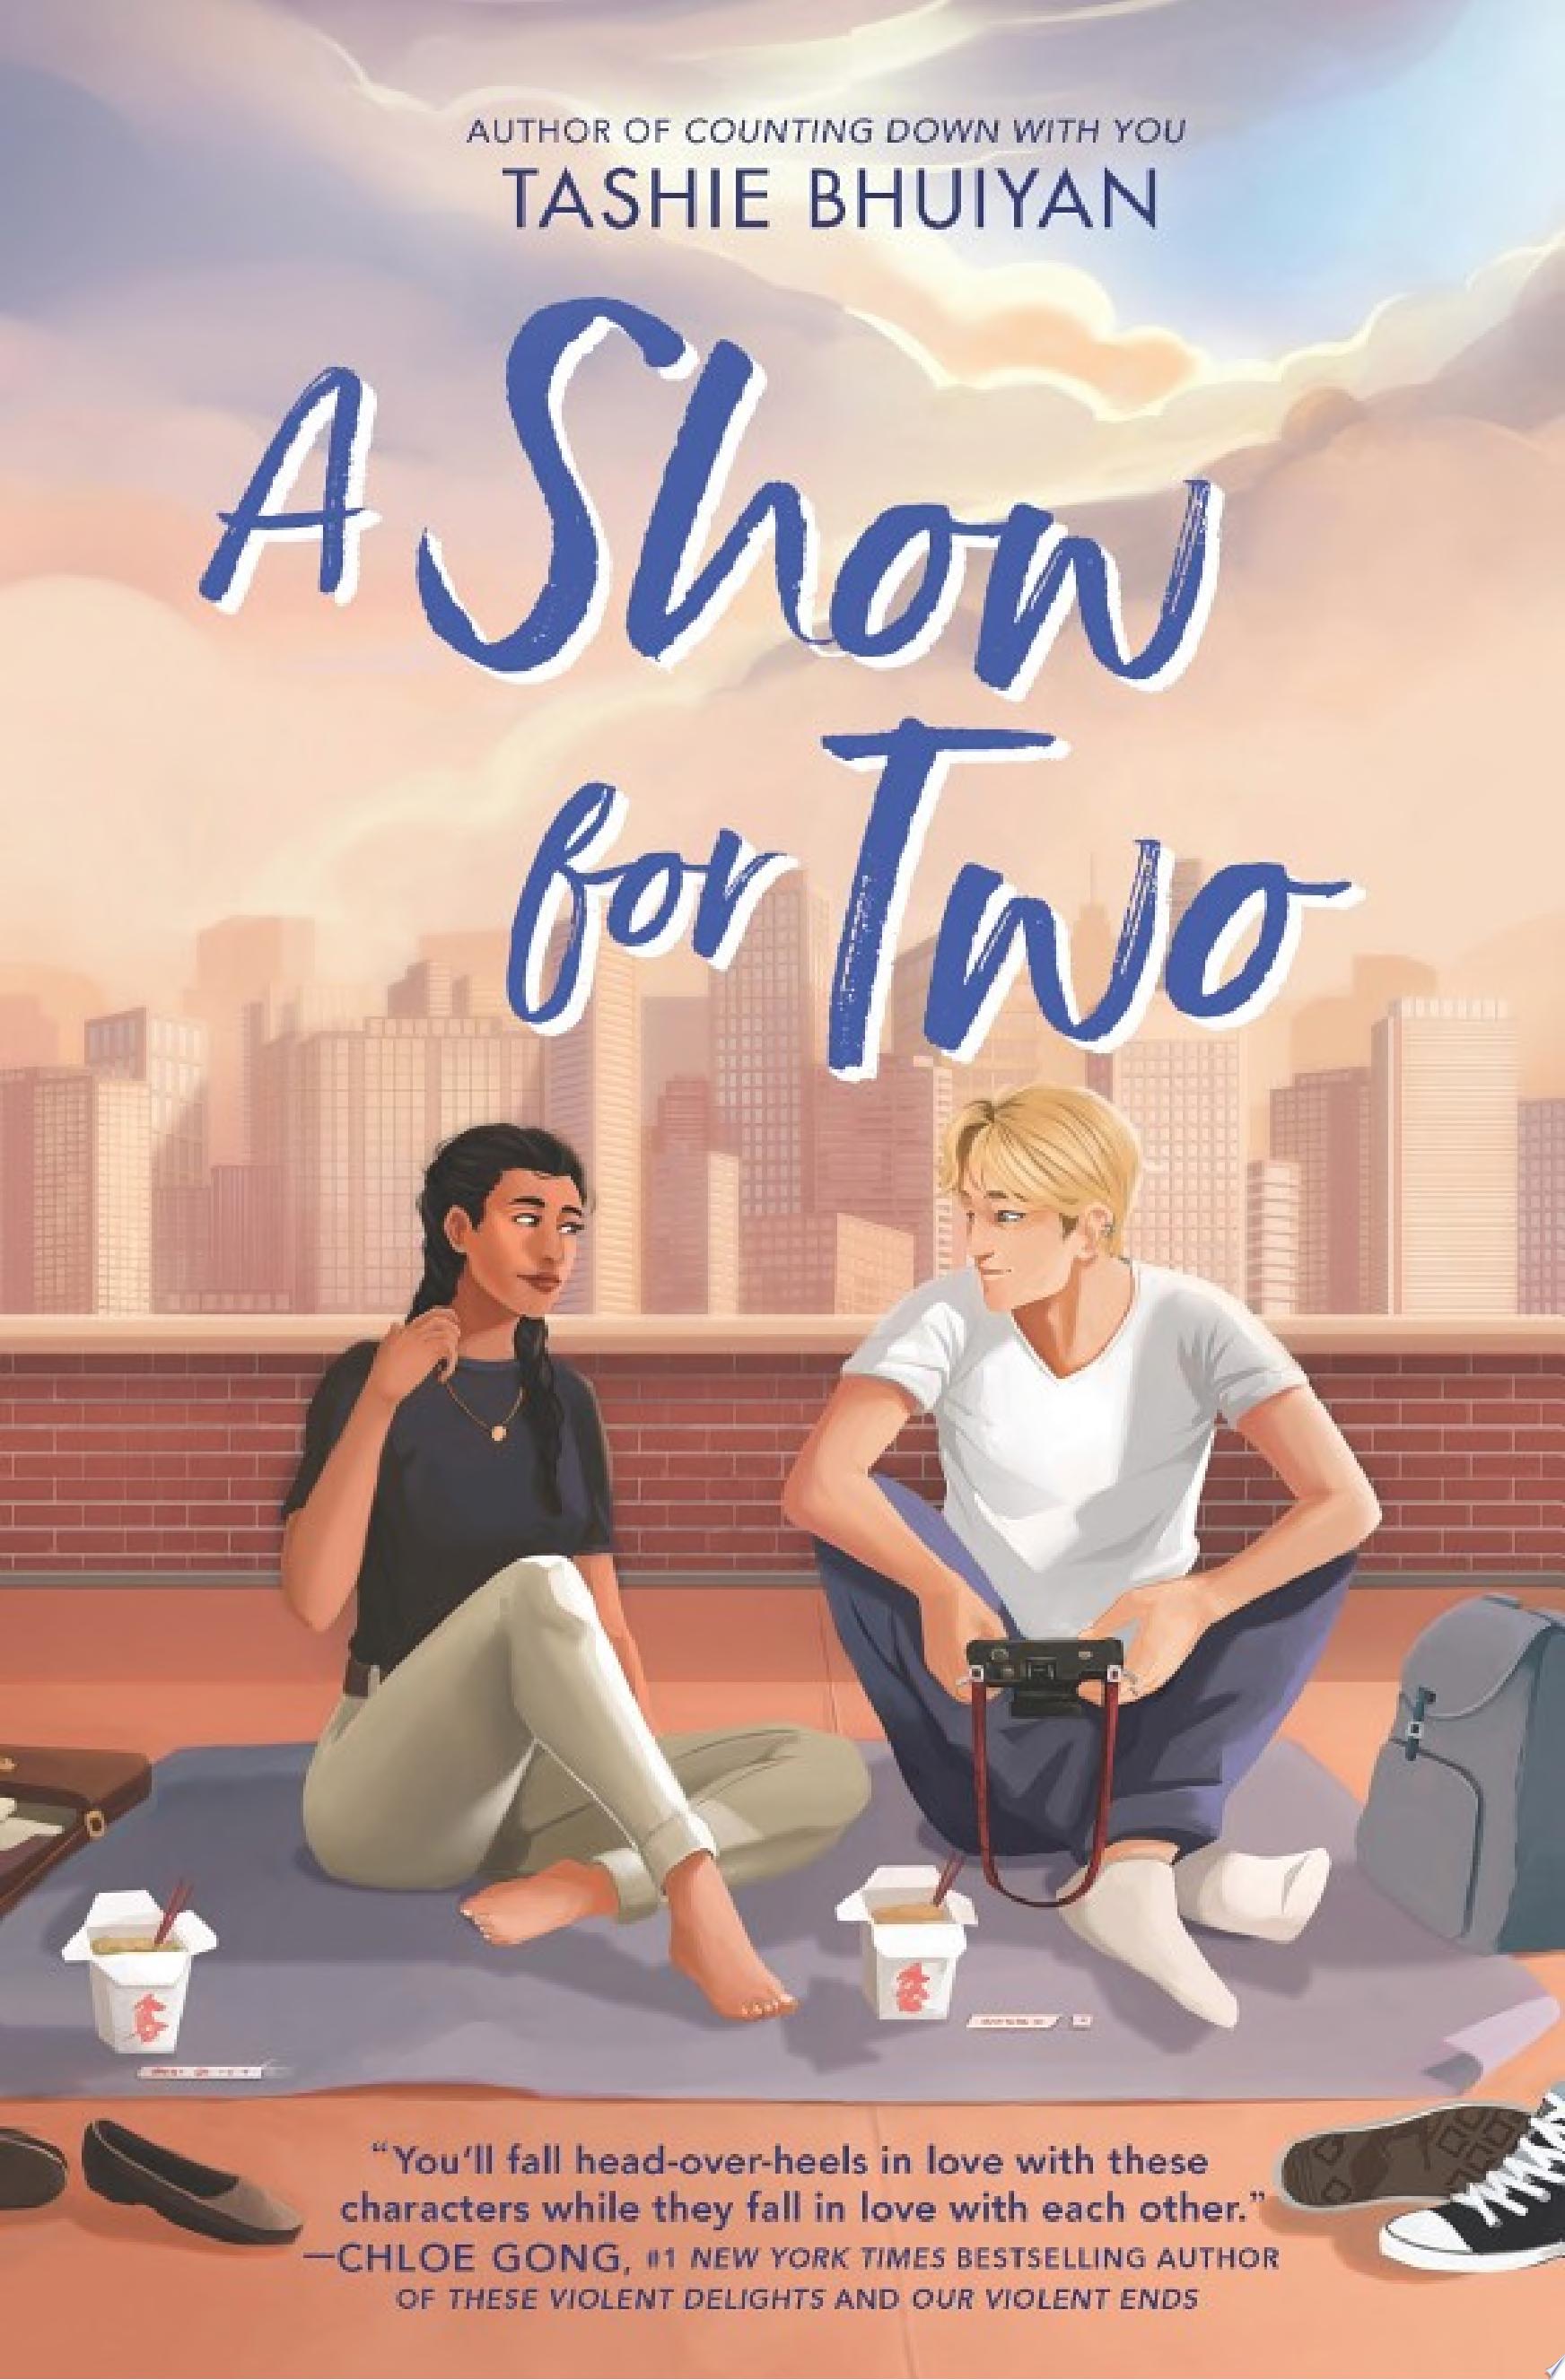 Image for "A Show for Two"